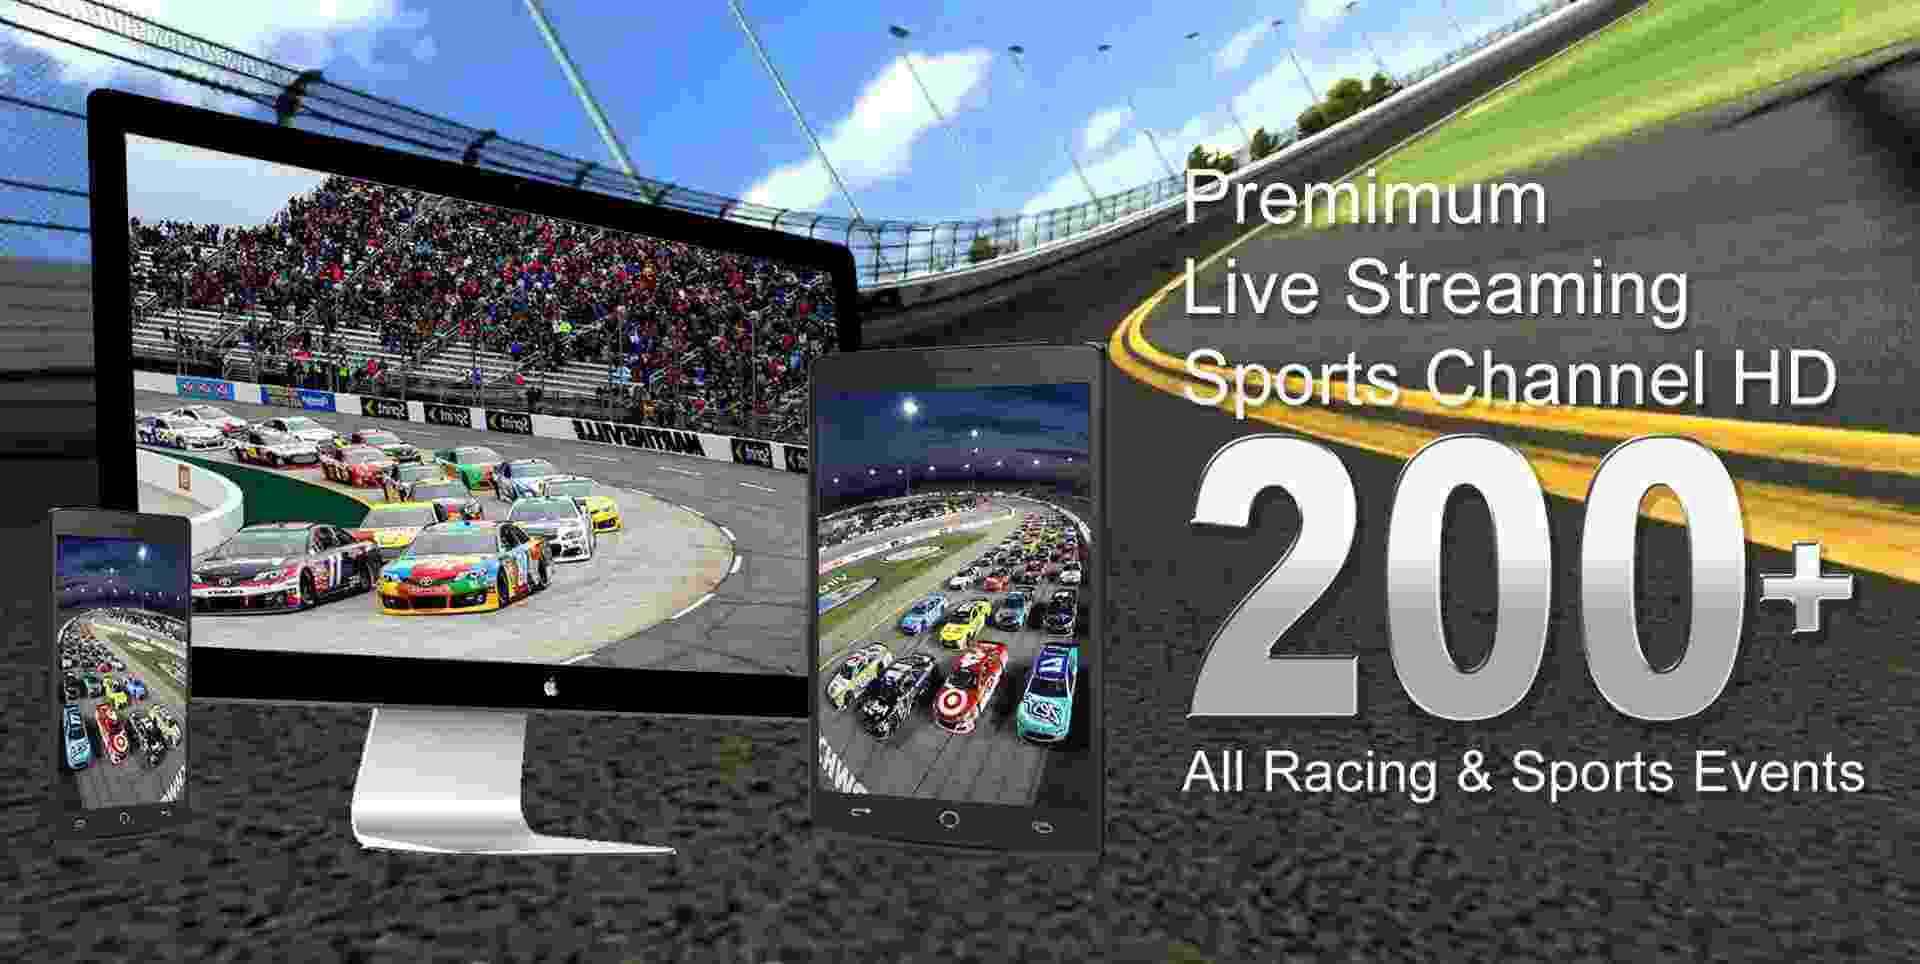 American Ethanol presents the Drivin for Linemen 200 brought to you by Ameren